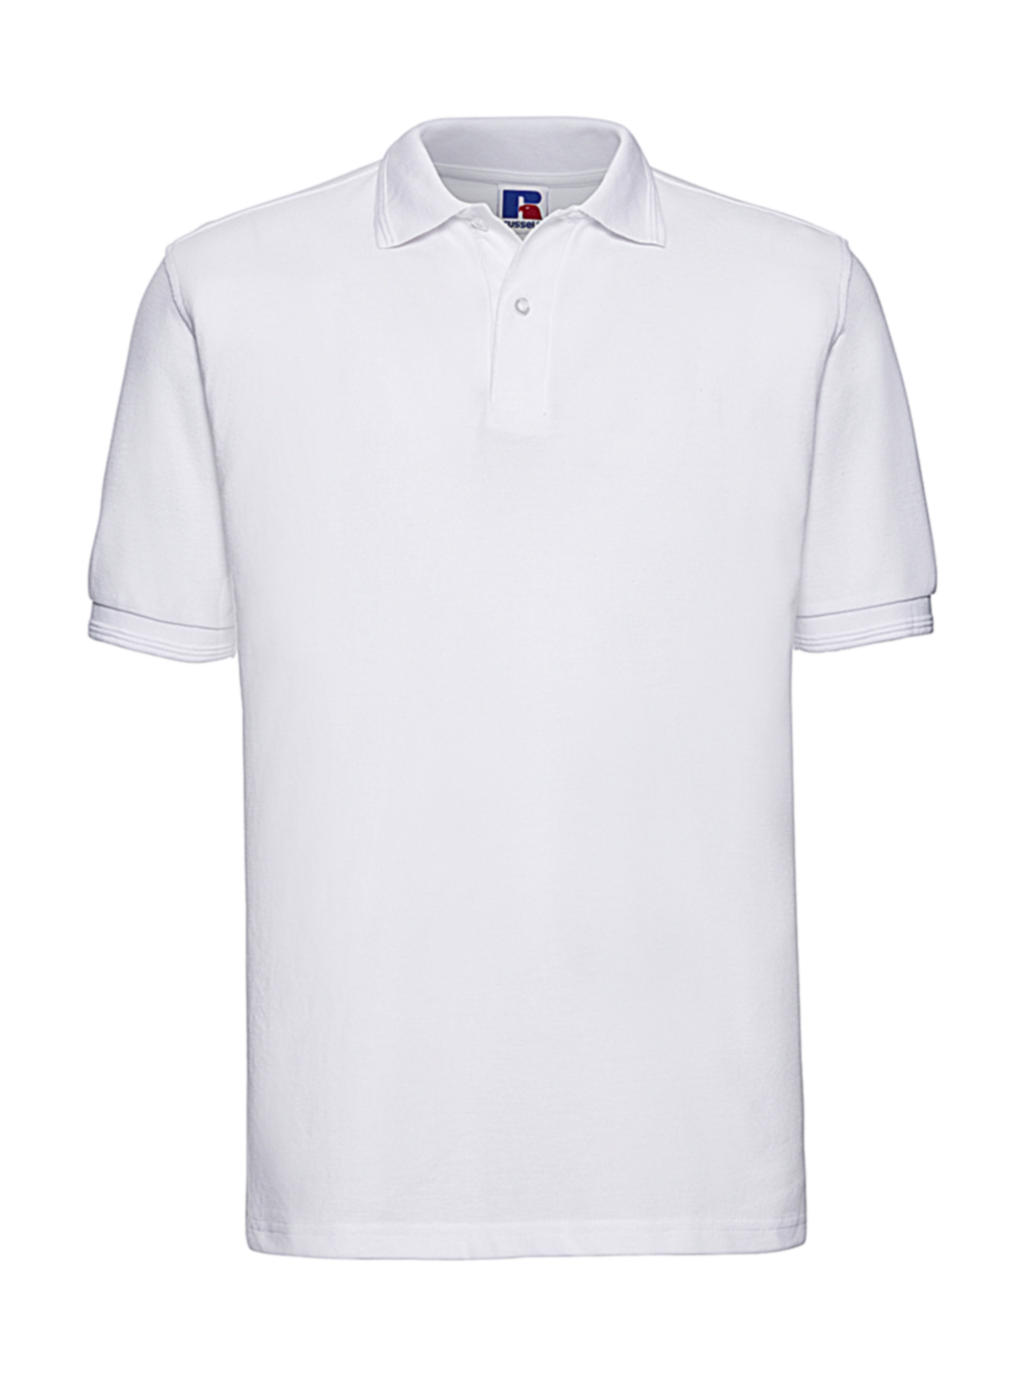  Hardwearing Polo - 5XL and 6XL in Farbe White